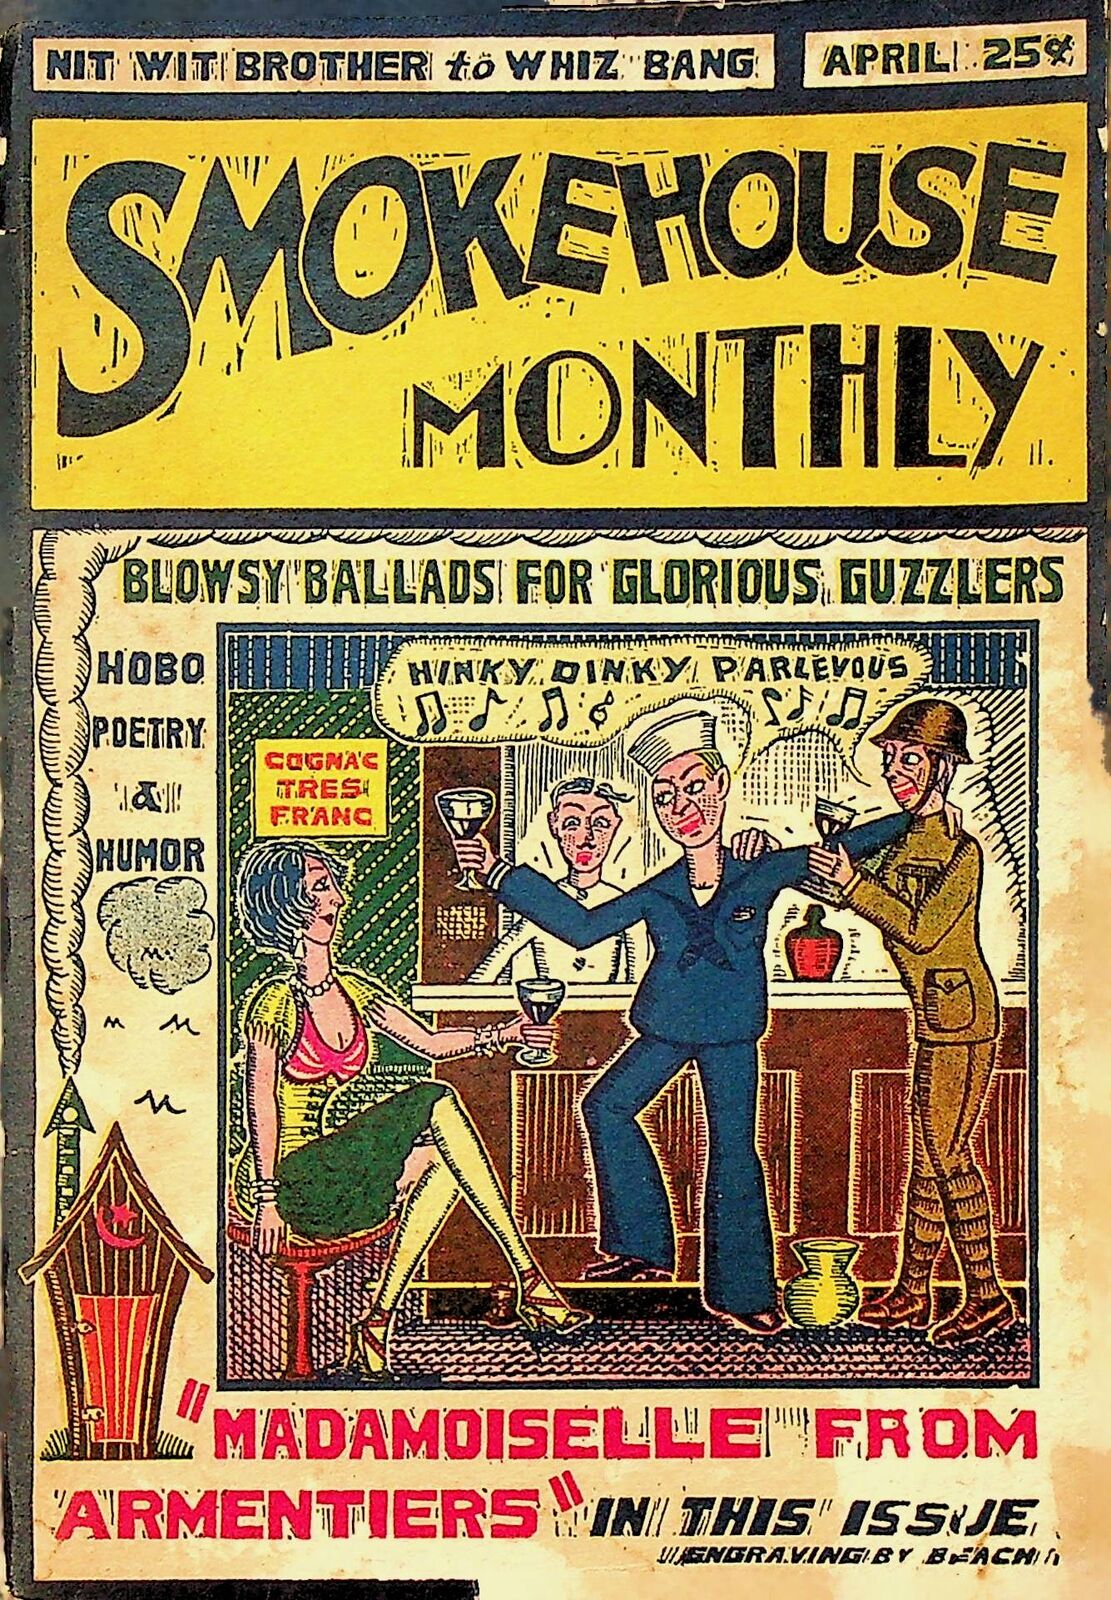 Smokehouse Monthly #3 GD/VG 3.0 1928